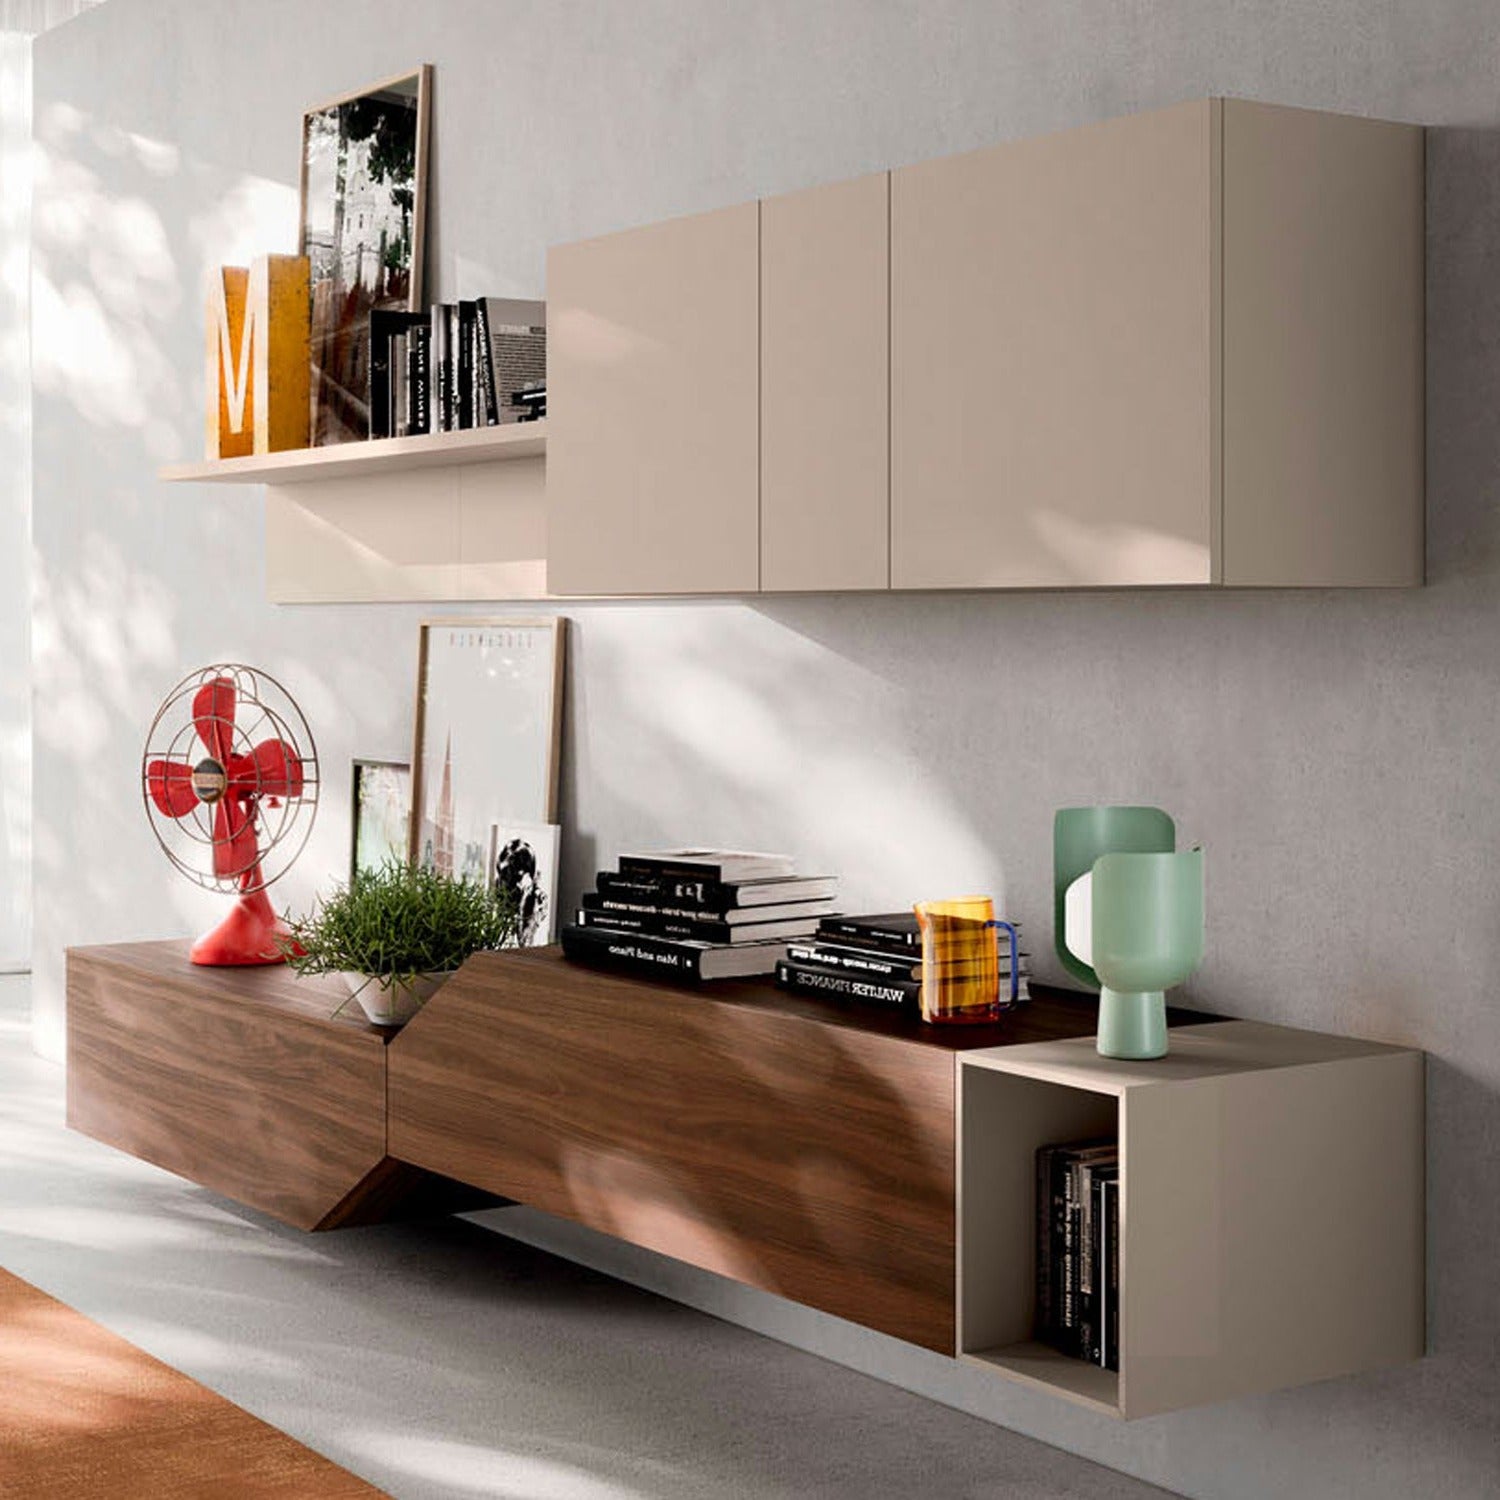 Light Day 12 geometric design wall unit by Orme Design